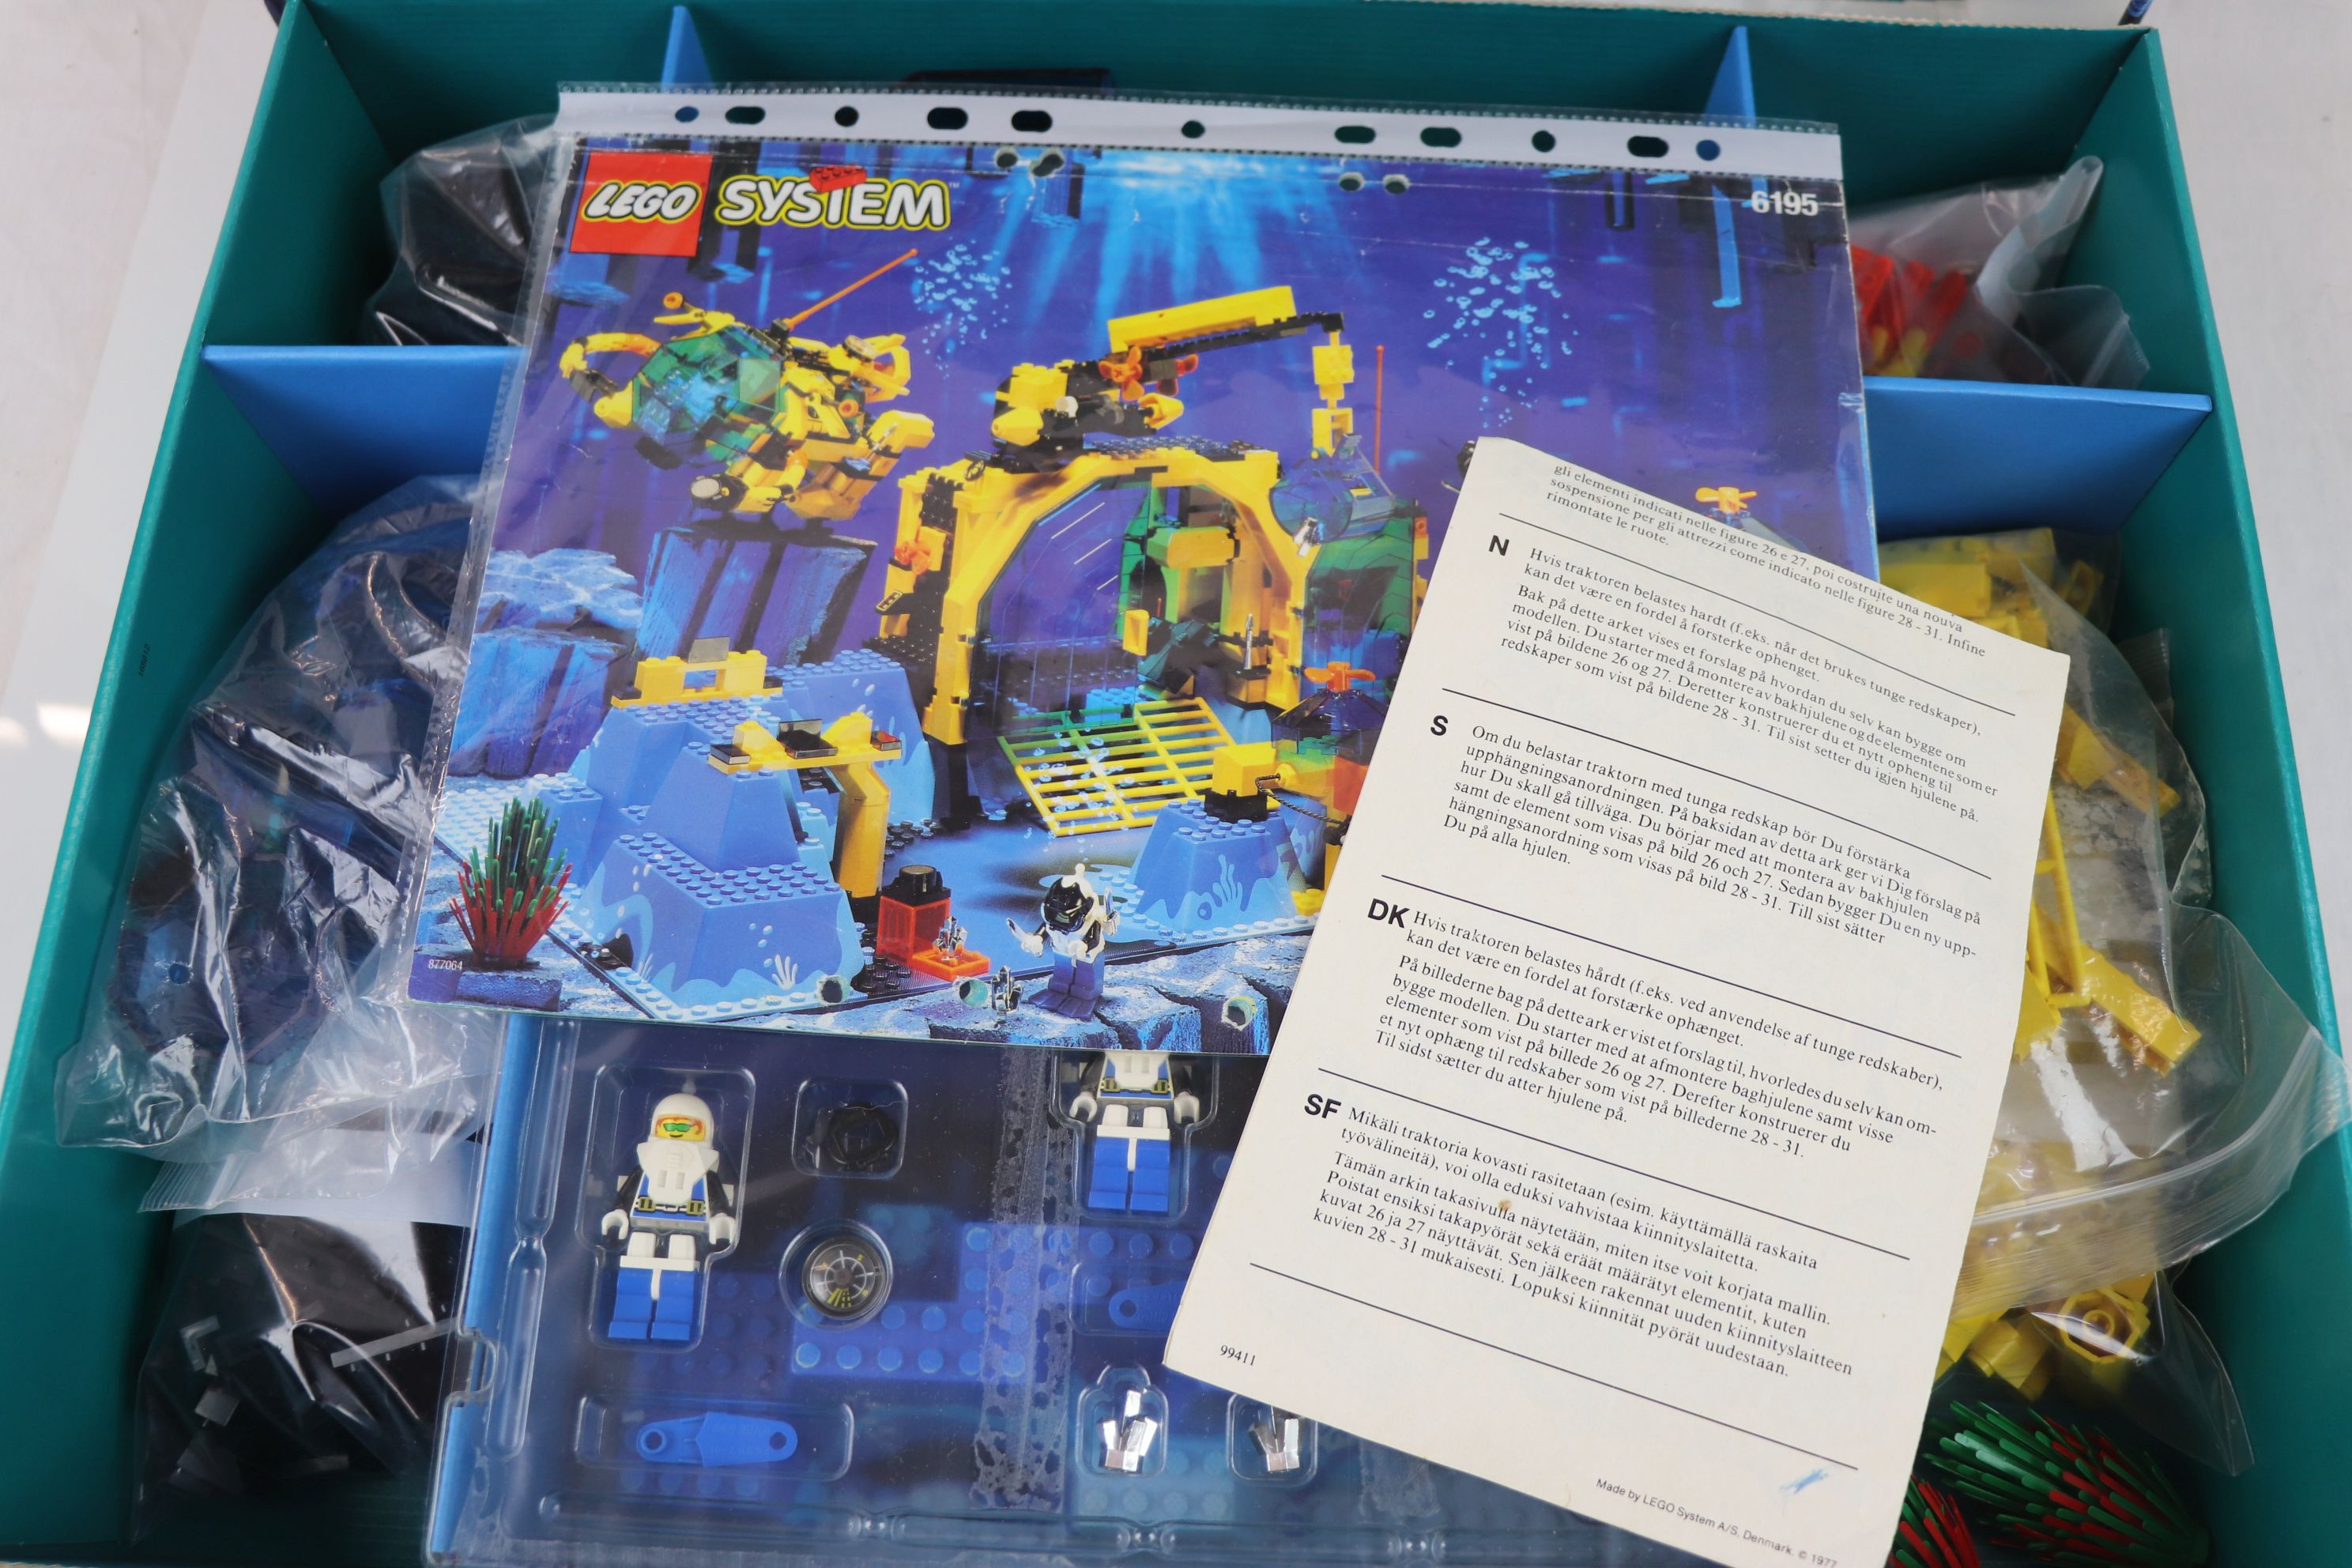 Lego - Boxed Lego System 6195 Aquanauts Neptune Discovery set unchecked but appearing complete - Image 13 of 16